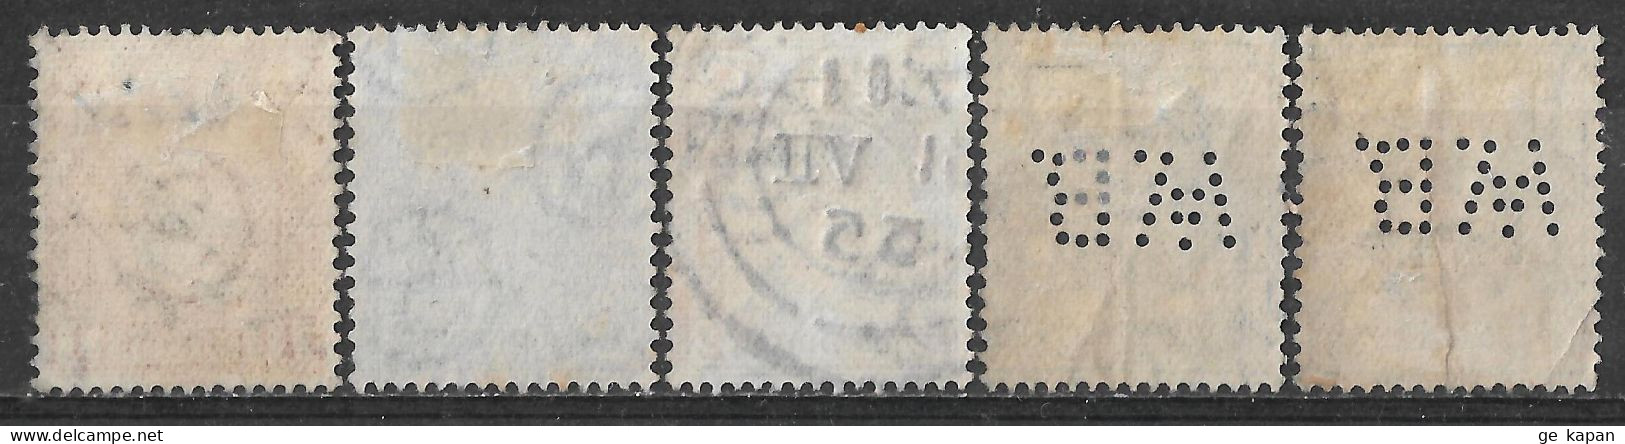 1922-1923 IRELAND SET OF 5 USED STAMPS (Michel # 41A,43A,45A) CV €5.30 - Usati